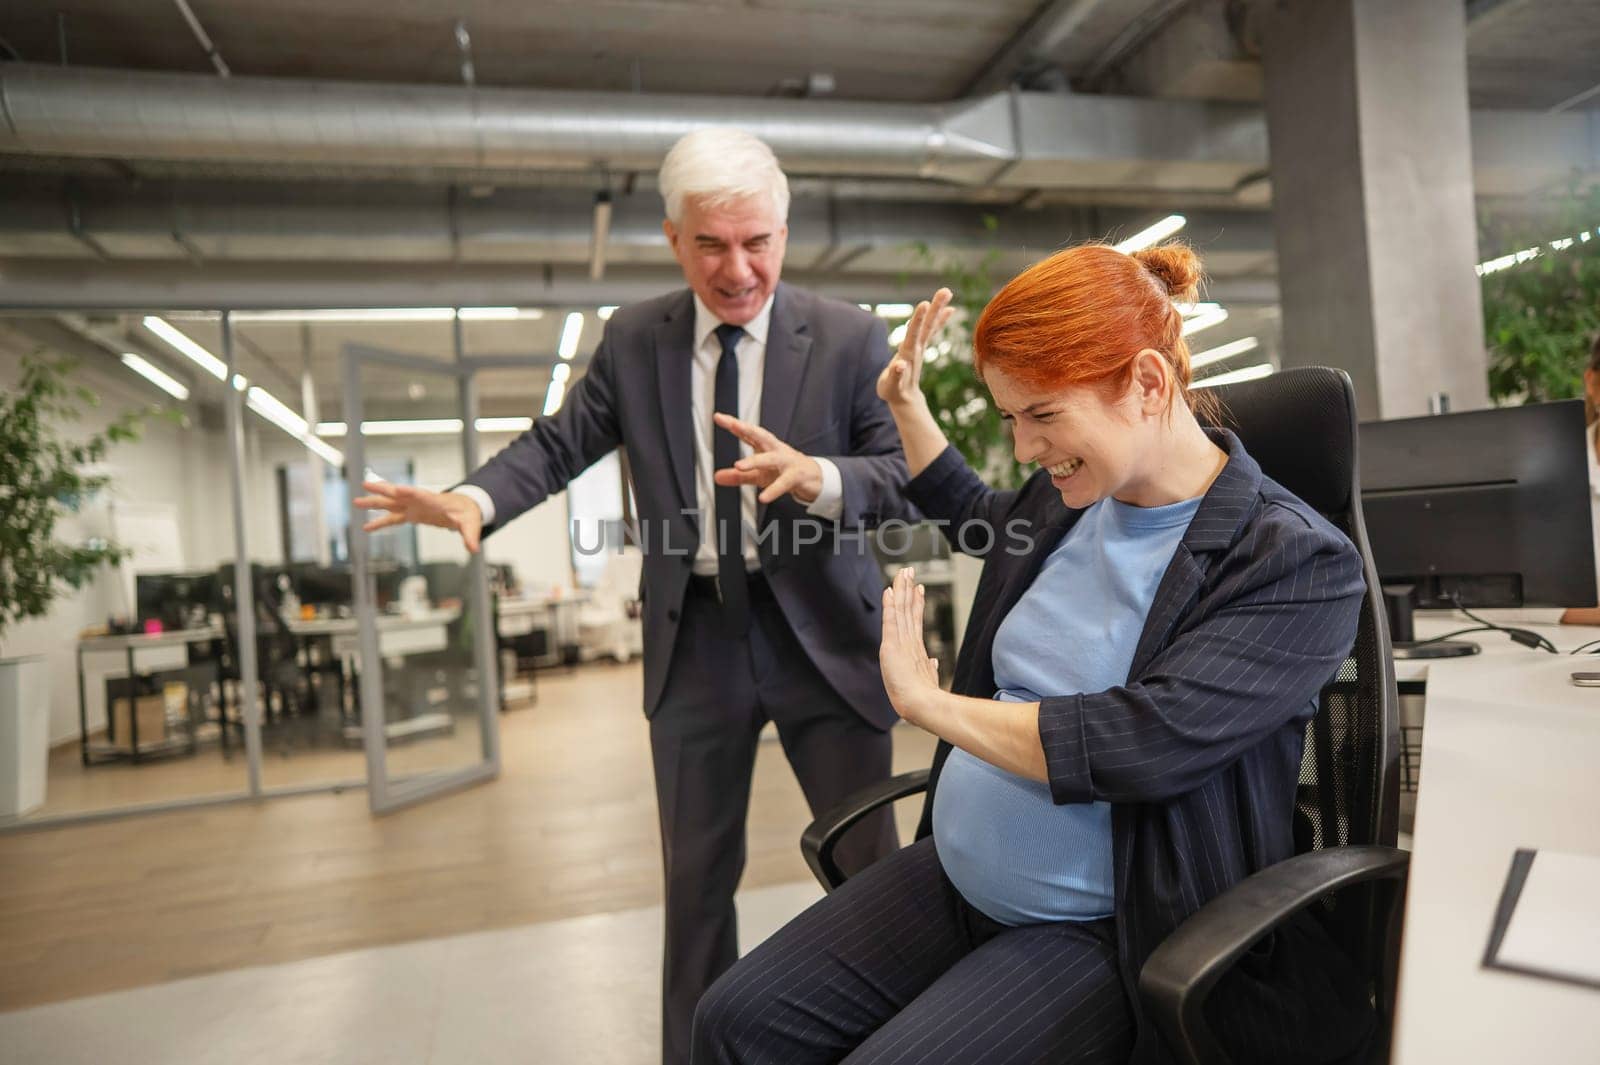 Boss swears at pregnant subordinate woman in office